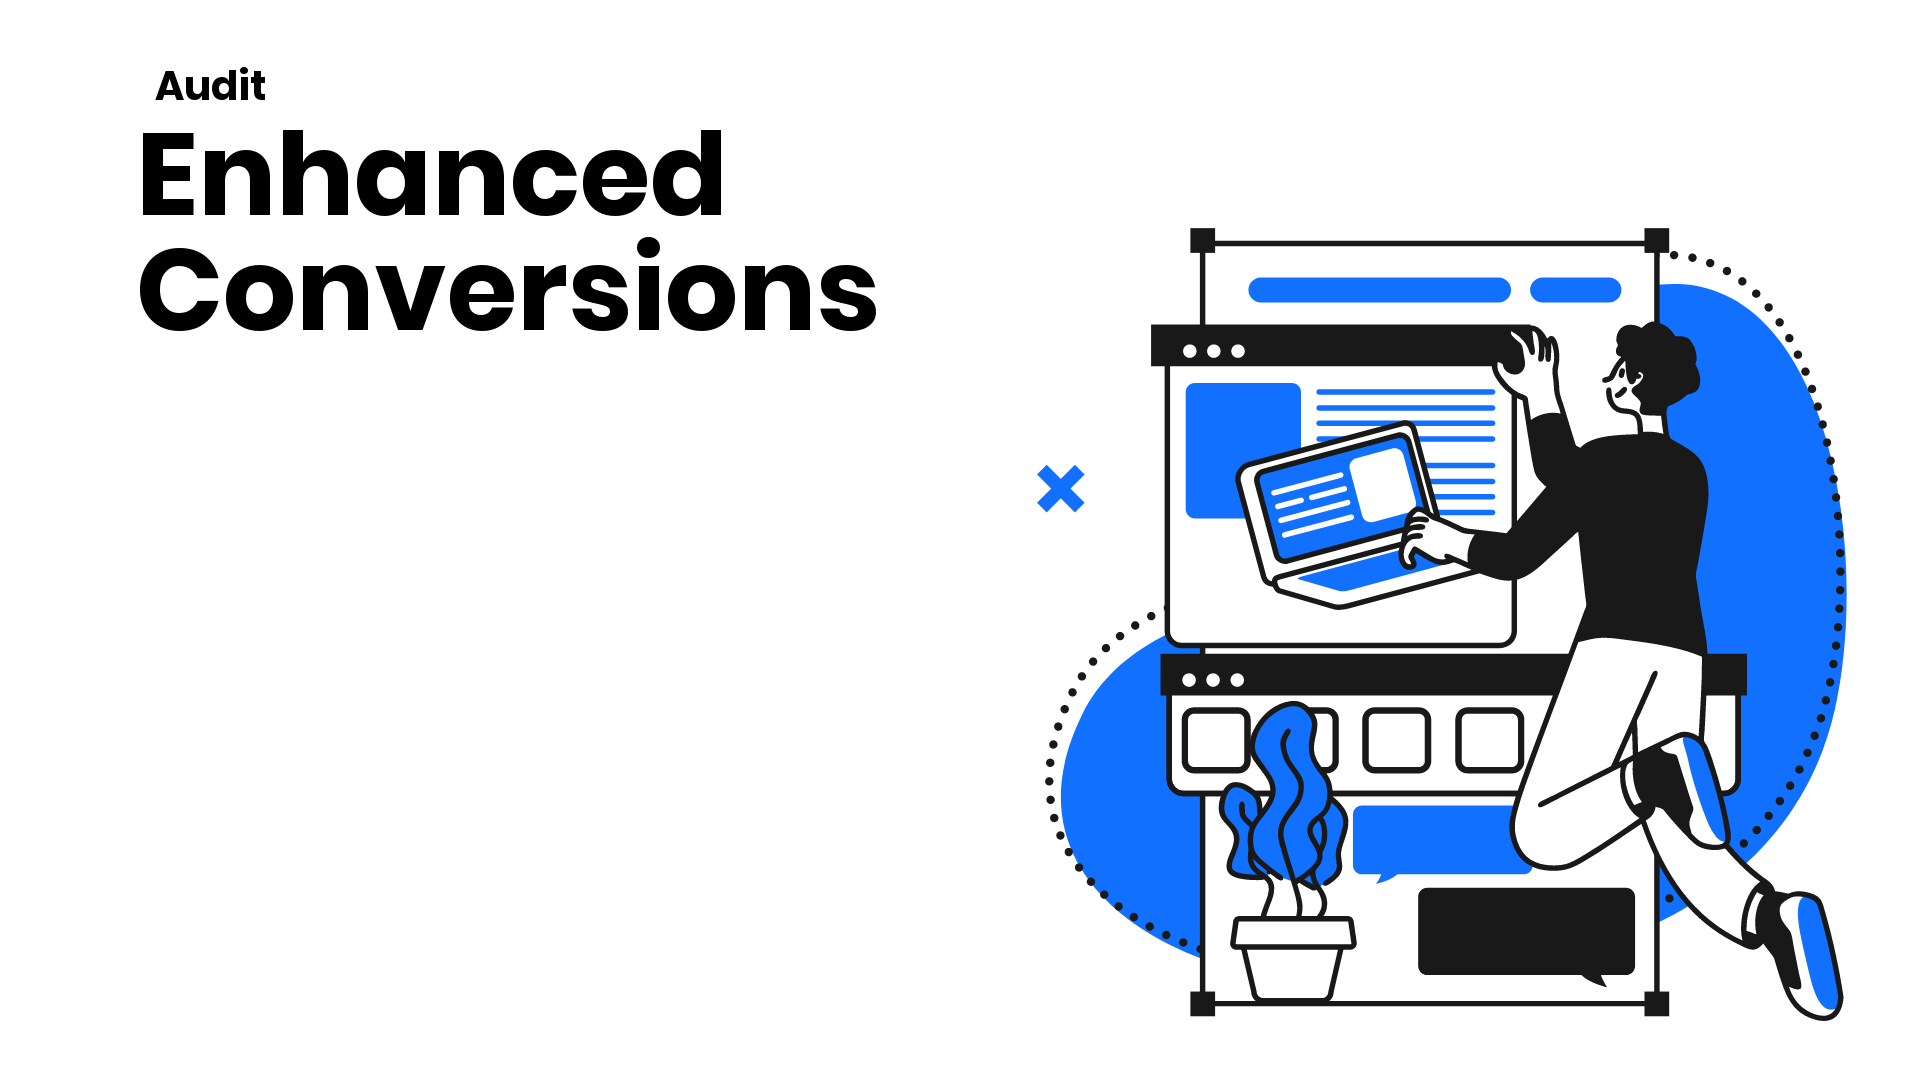 How to audit enhanced conversions in Google Ads